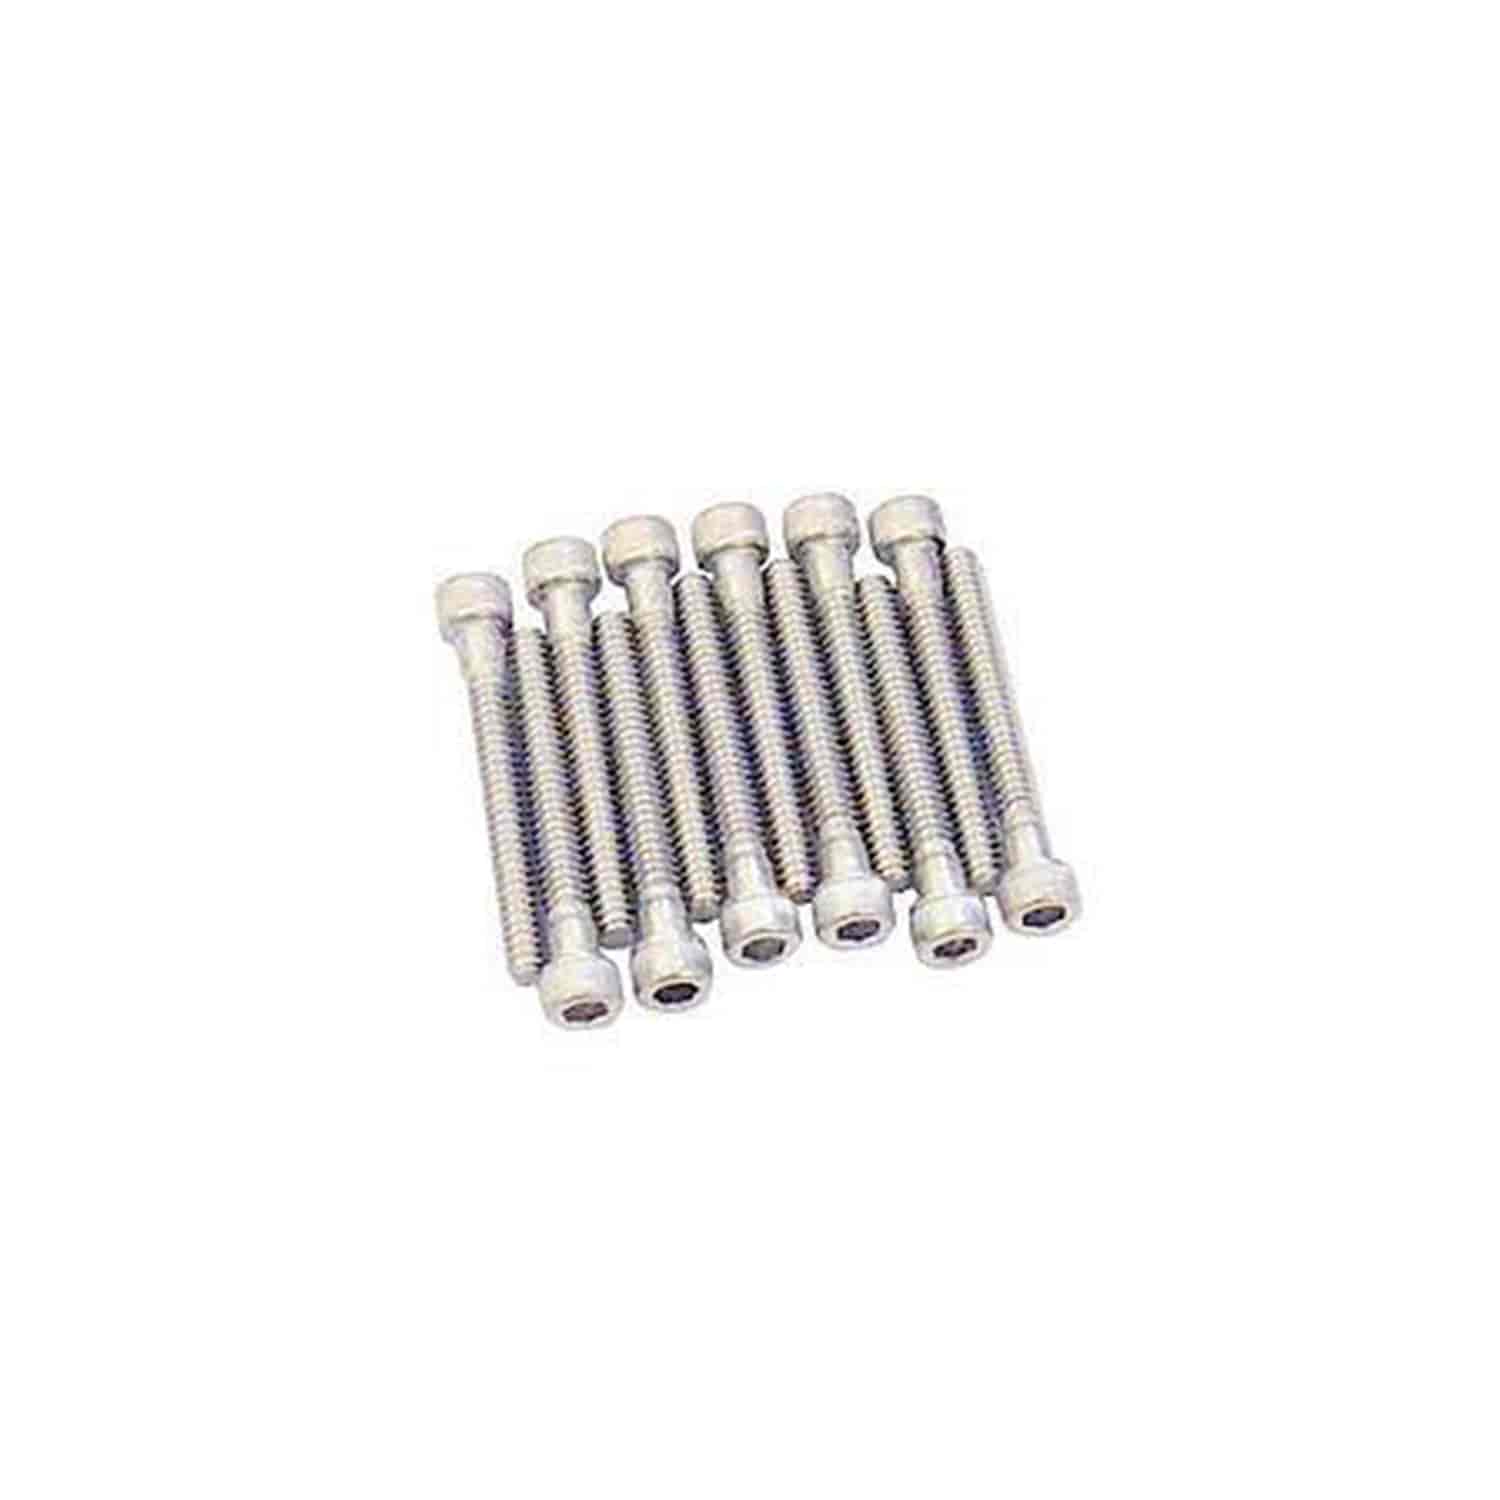 Package of 12 hub bolts for 1/2-ton hubs